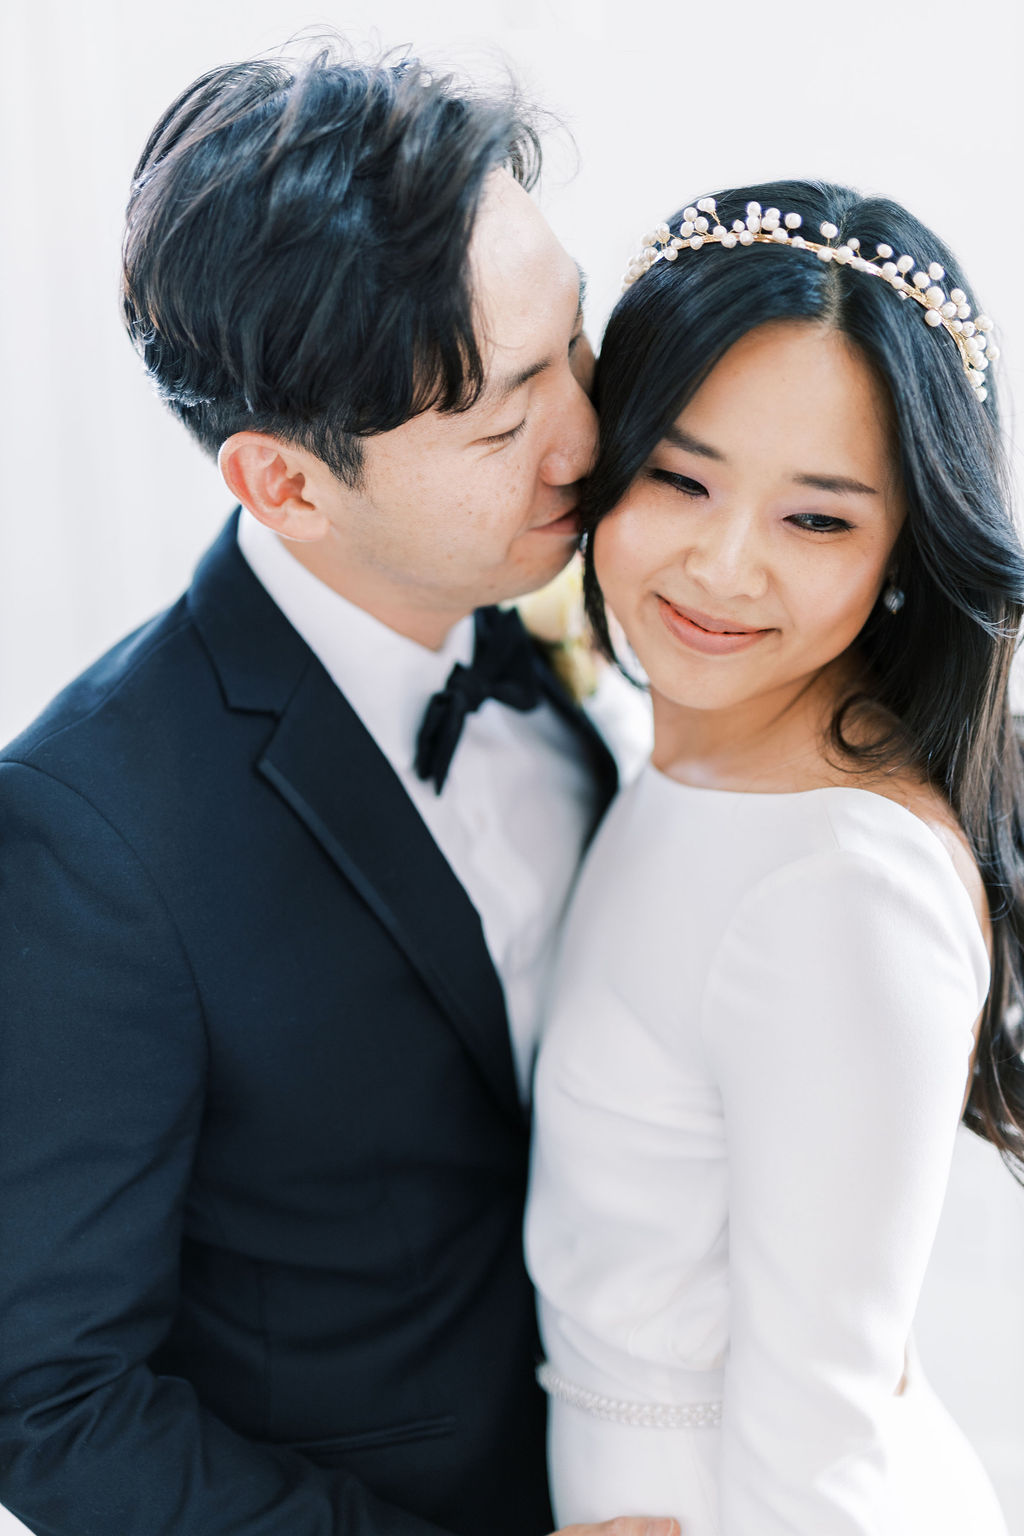 Riverbridge event center editorial with korean bride and groom